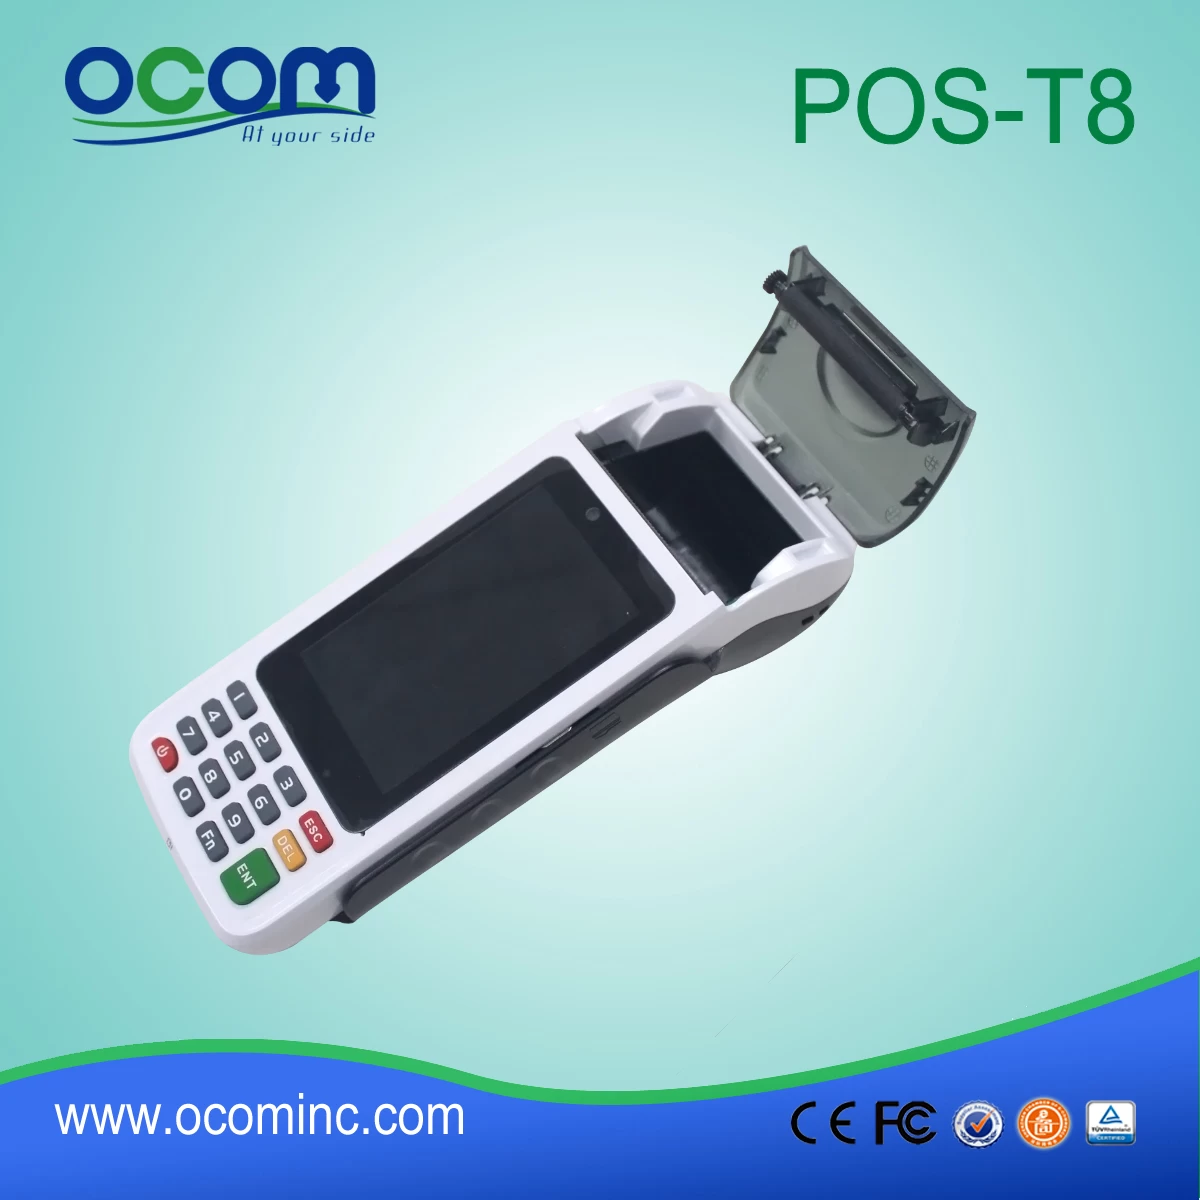 Mobile pos terminal with NFC Reader (POS-T8)